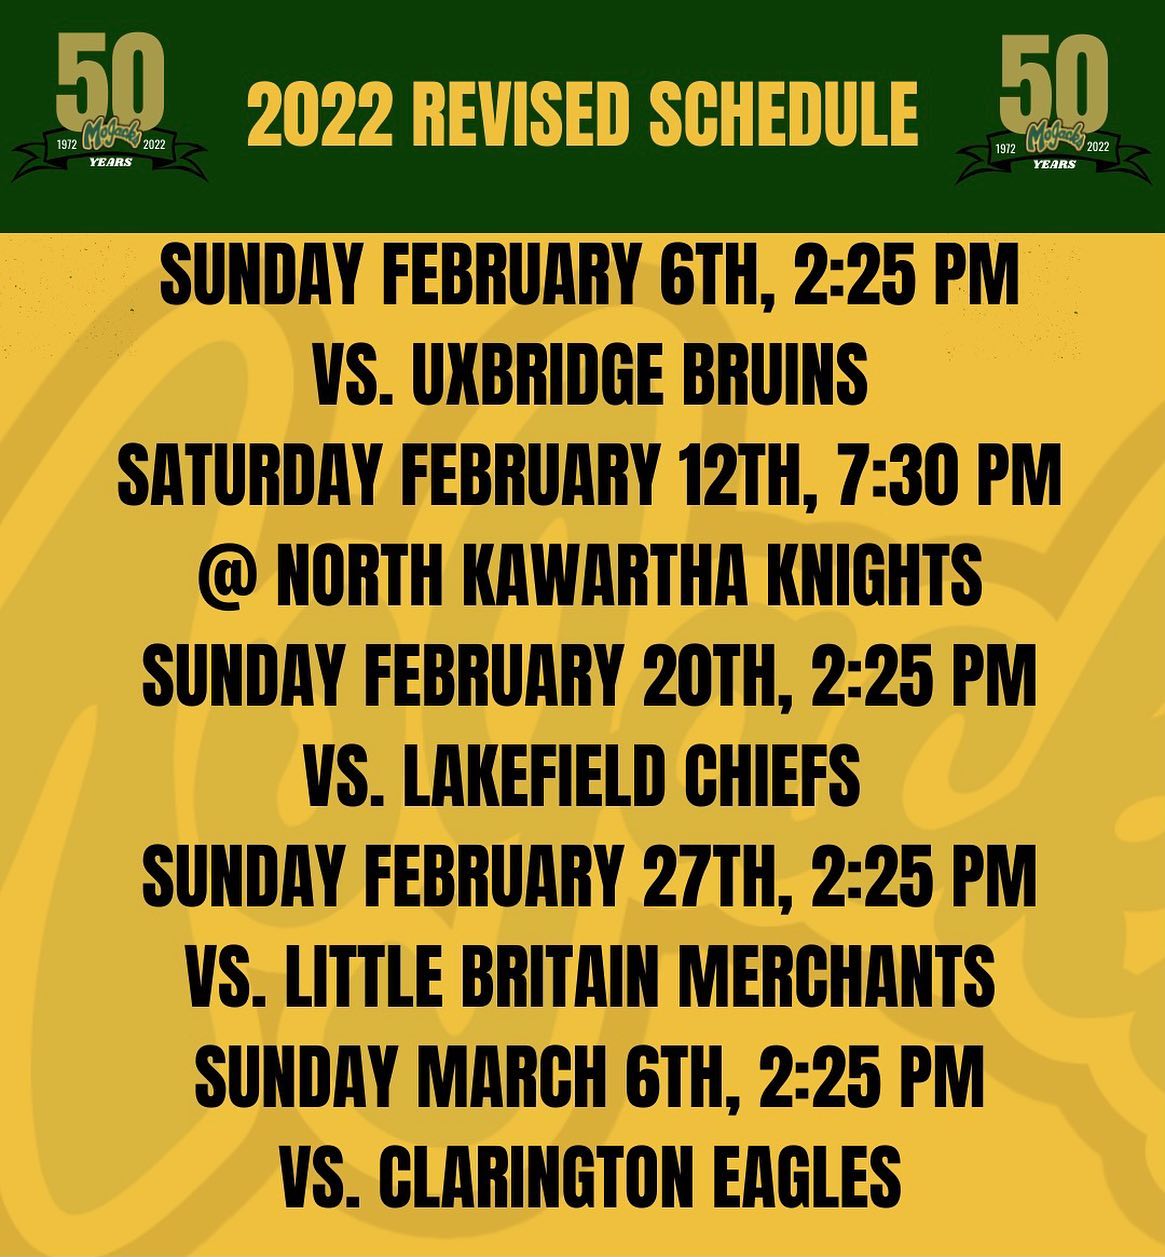 🚨🚨REVISED SCHEDULE🚨🚨

We are back at the Gog February 6th as we host the Uxbridge Bruins to kick off our final 5 games of the season!

GO JACKS GO

#50Years
#JackedUp